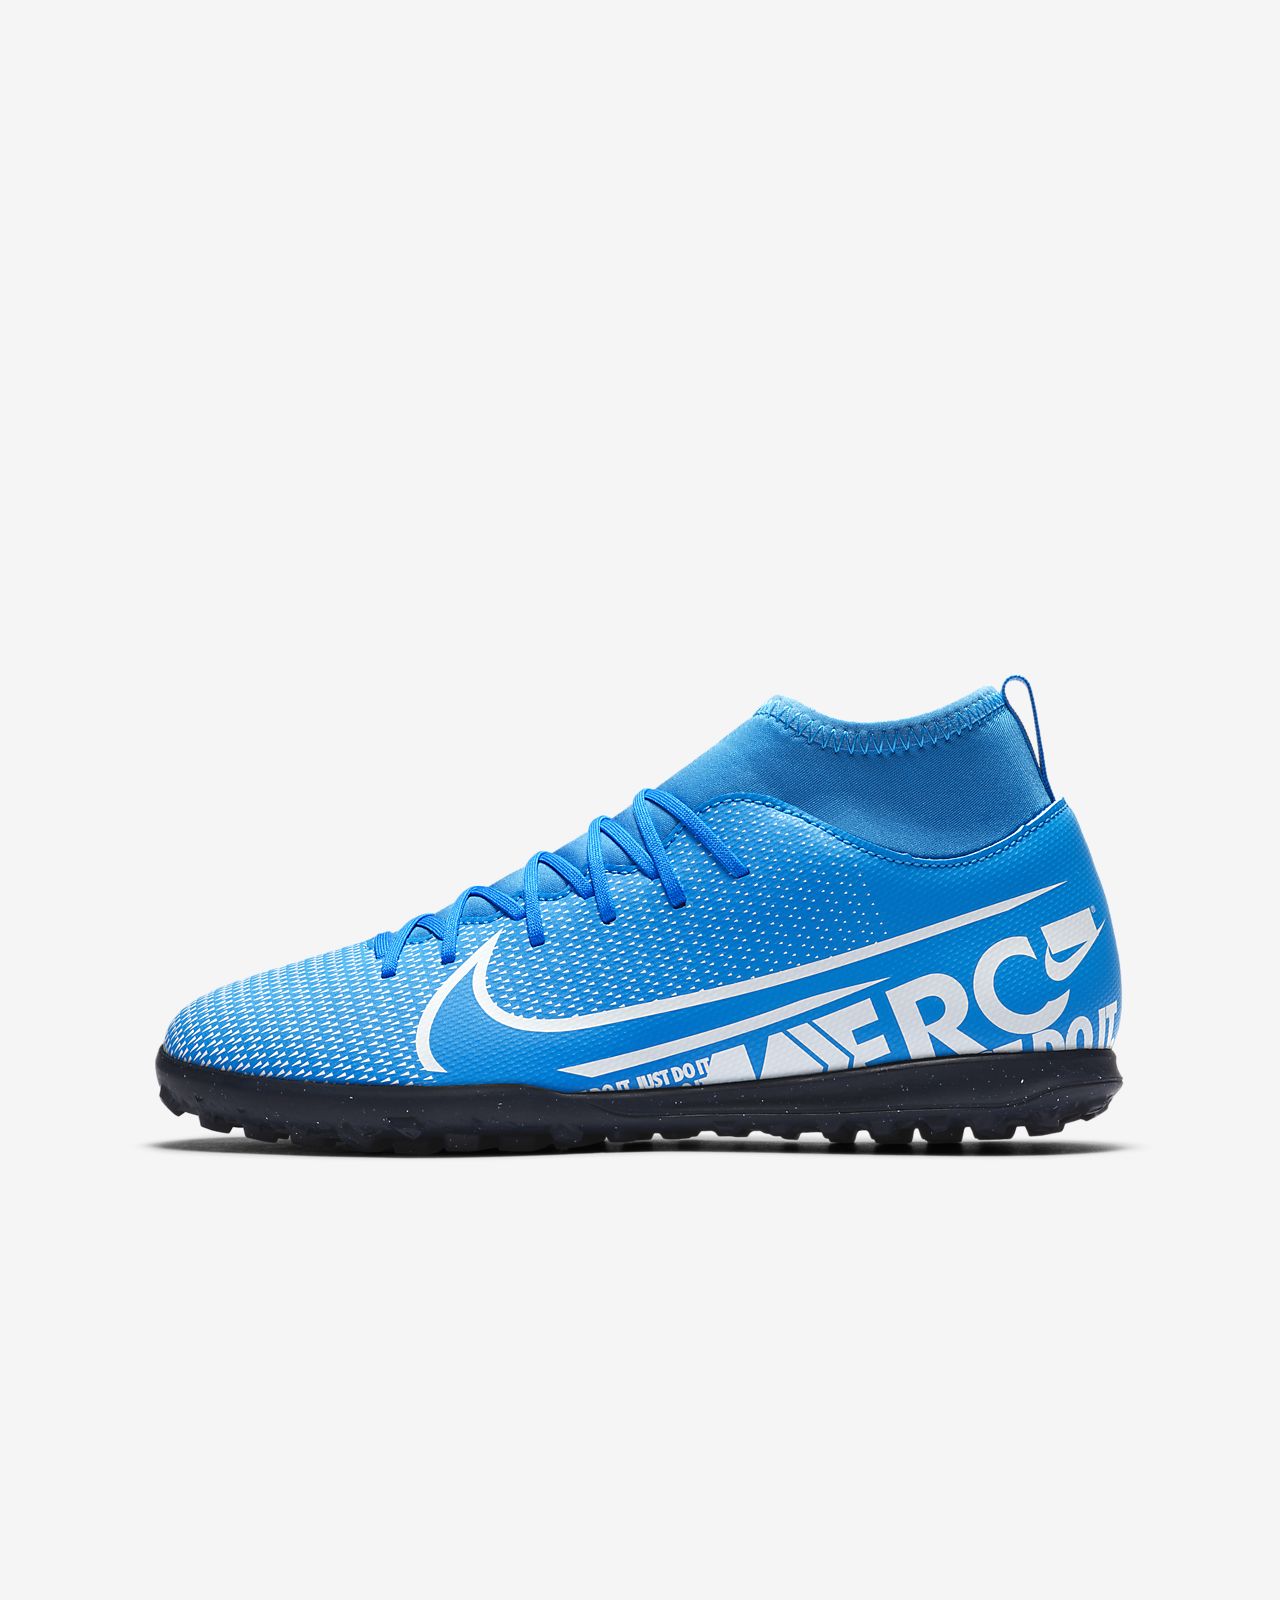 Nike Superfly 6 Deportes y Fitness Clubs at Mercado Libre.